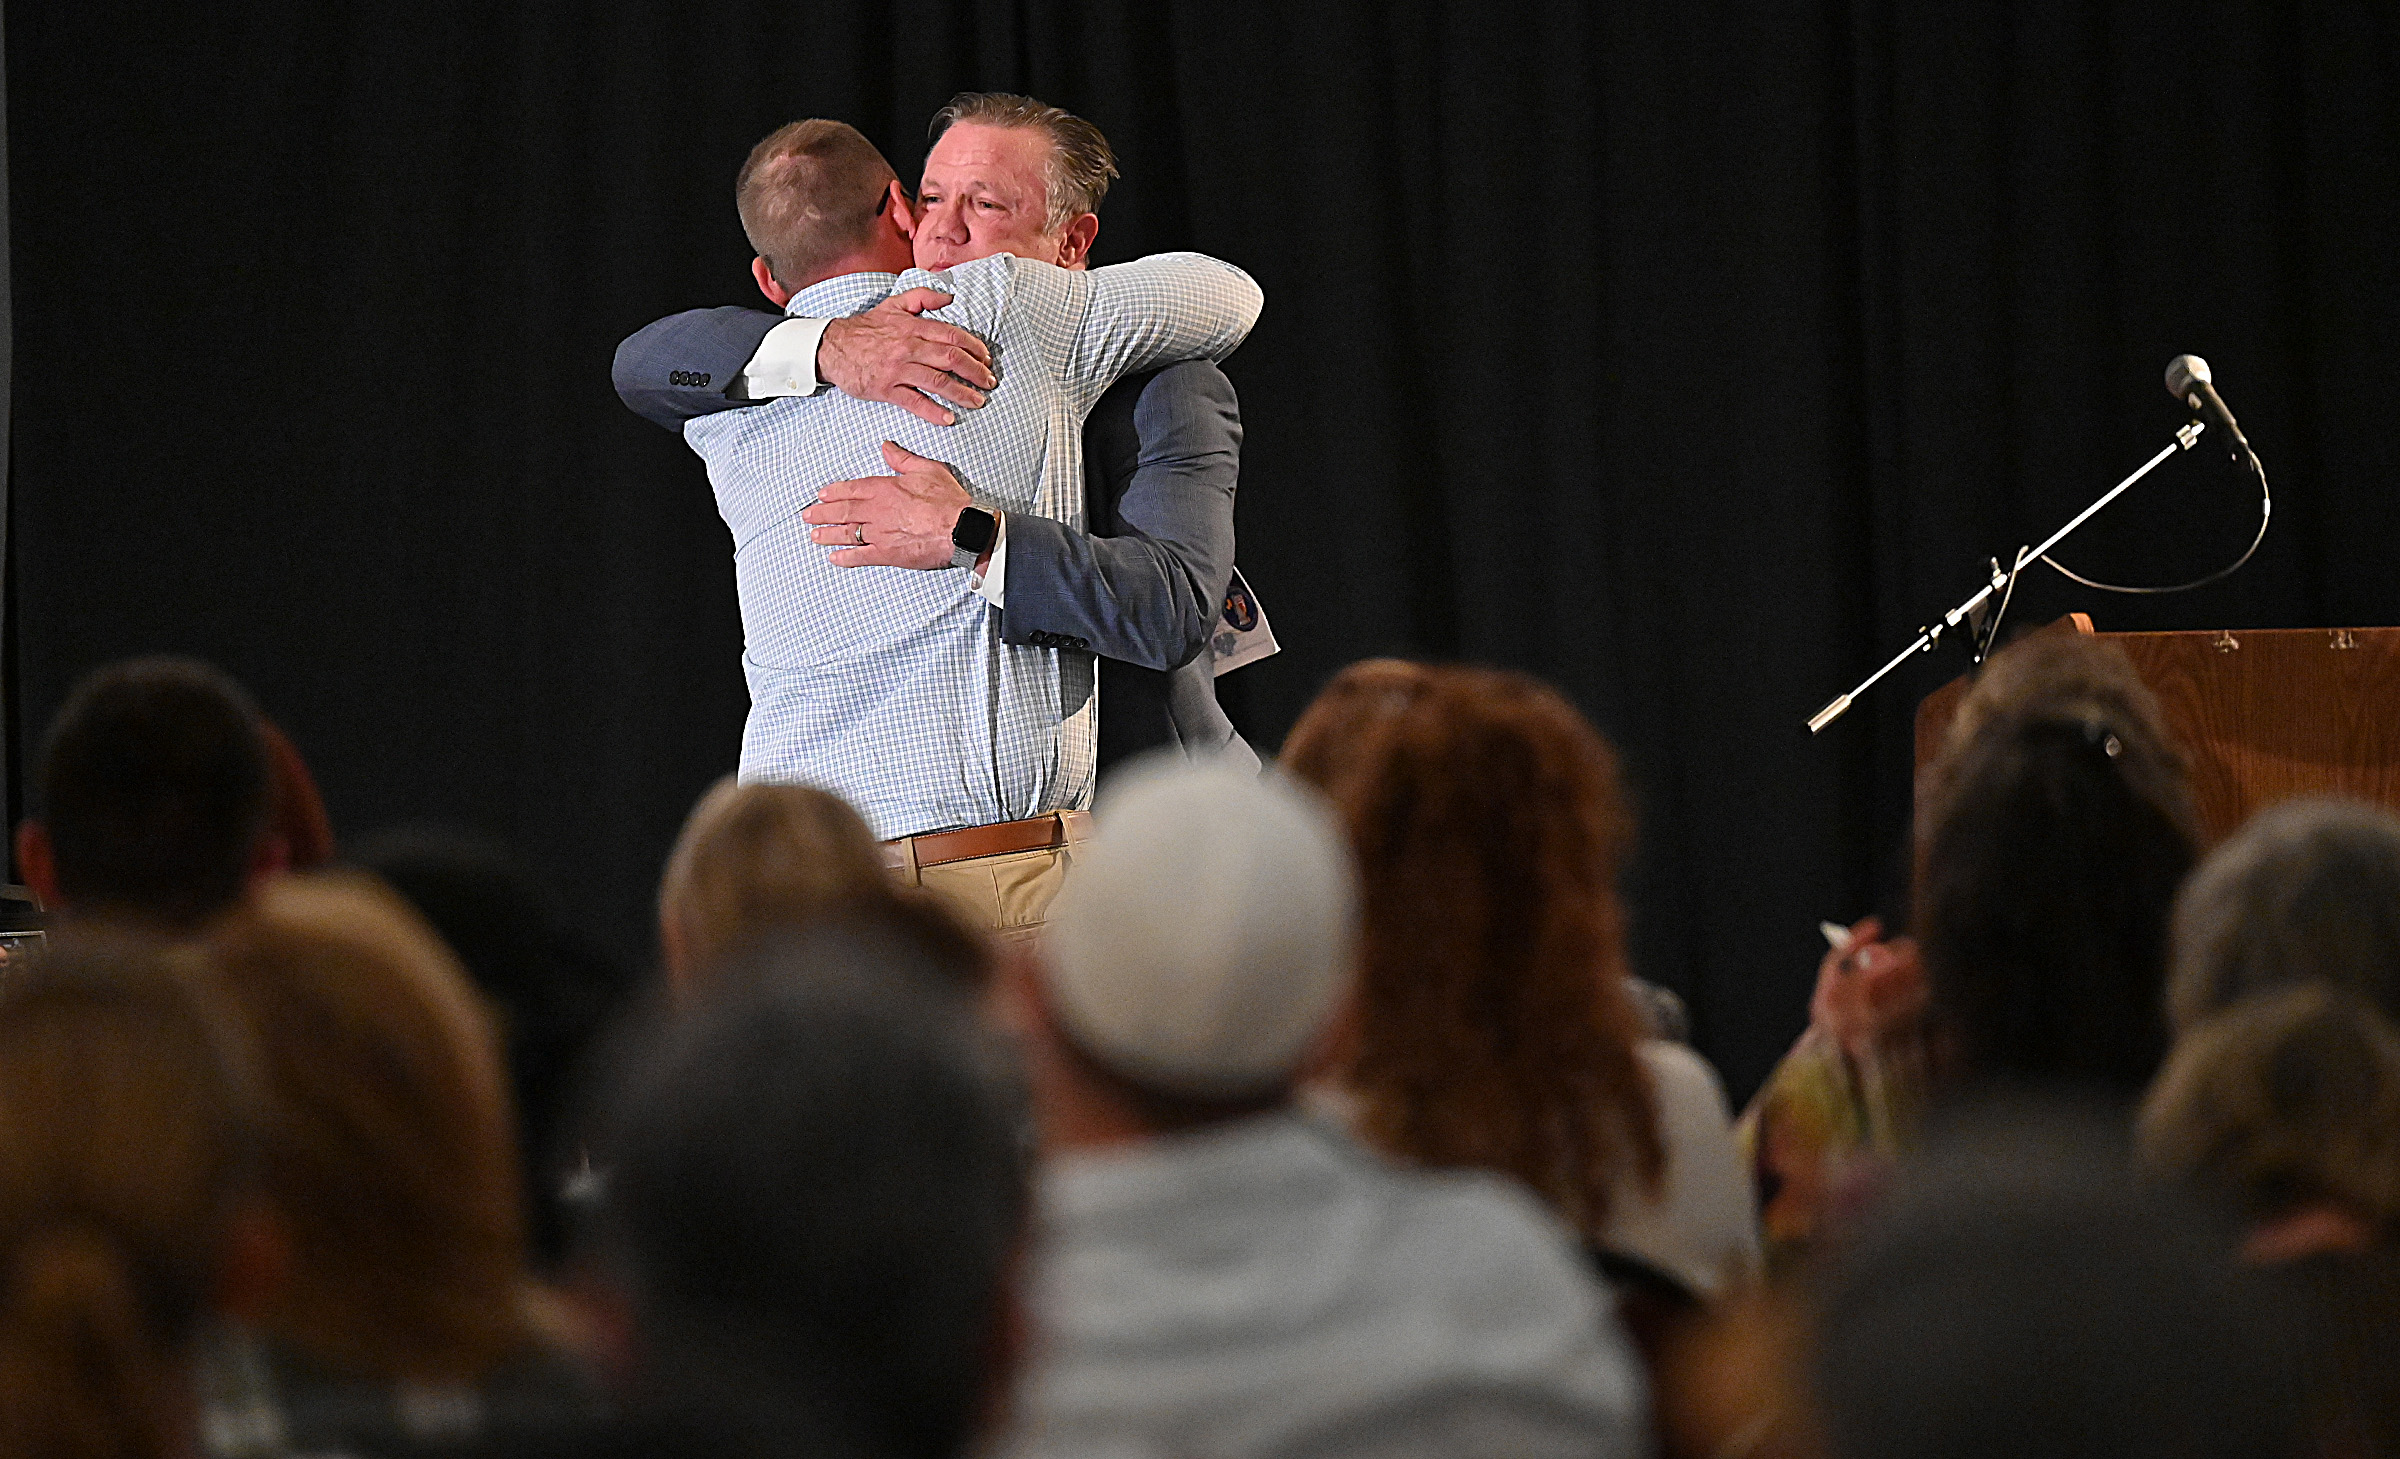 Tim Weber, Community Education Liaison for the States Attorney's Office, hugs Brian Kimmel, after introducing him to give "A Recovery Perspective" at the 9th Annual Drug Overdose and Prevention Vigil Tuesday at Portico at St. John in Westminster. (Jeffrey F. Bill/Staff photo)